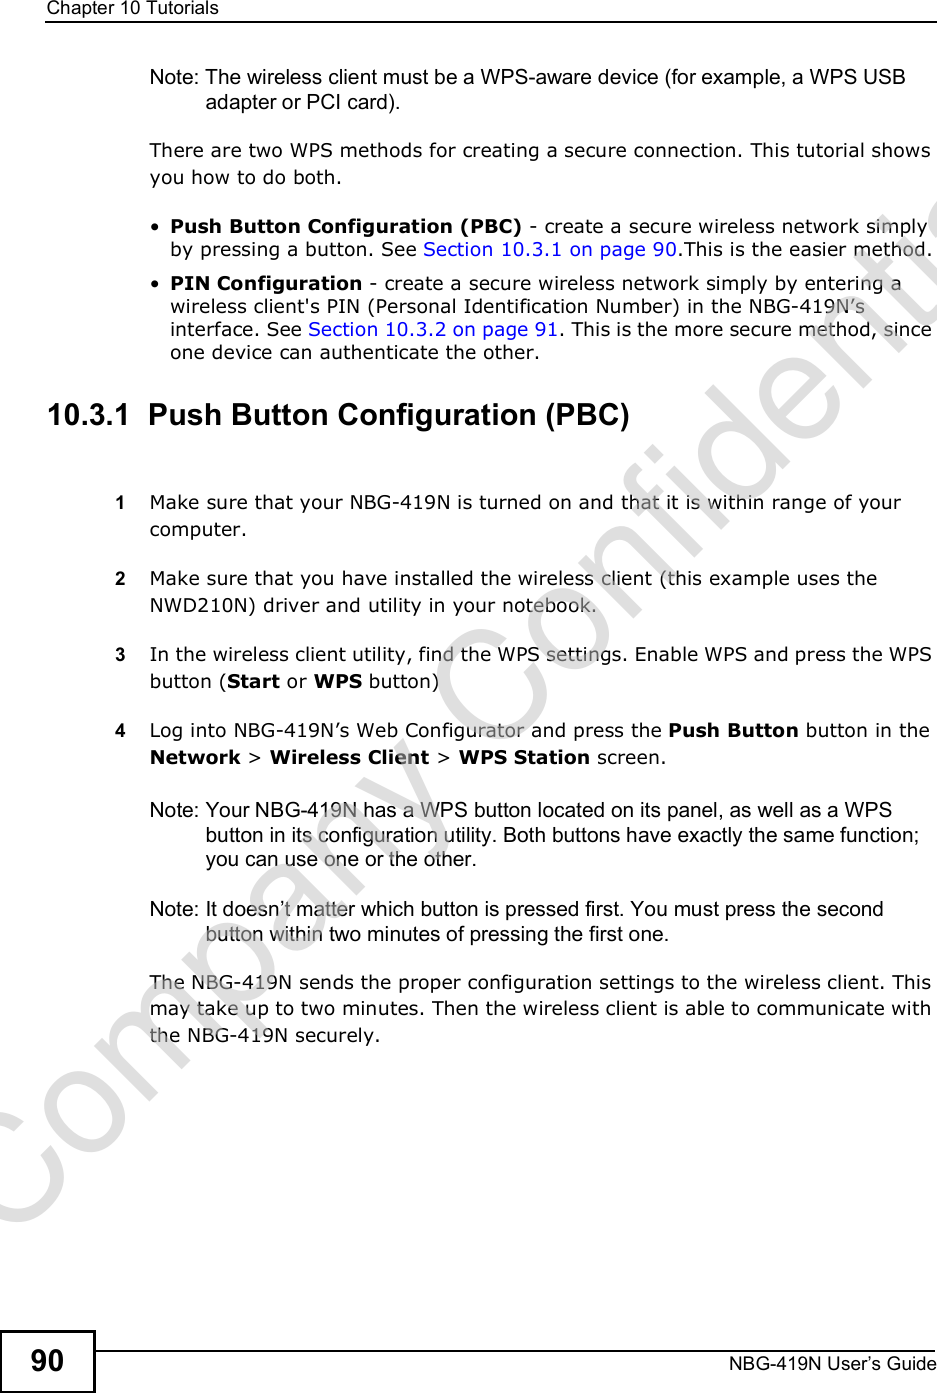 Chapter 10TutorialsNBG-419N User s Guide90Note: The wireless client must be a WPS-aware device (for example, a WPS USB adapter or PCI card).There are two WPS methods for creating a secure connection. This tutorial shows you how to do both. Push Button Configuration (PBC) - create a secure wireless network simply by pressing a button. See Section 10.3.1 on page 90.This is the easier method. PIN Configuration - create a secure wireless network simply by entering a wireless client&apos;s PIN (Personal Identification Number) in the NBG-419N!s interface. See Section 10.3.2 on page 91. This is the more secure method, since one device can authenticate the other.10.3.1  Push Button Configuration (PBC)1Make sure that your NBG-419N is turned on and that it is within range of your computer. 2Make sure that you have installed the wireless client (this example uses the NWD210N) driver and utility in your notebook.3In the wireless client utility, find the WPS settings. Enable WPS and press the WPS button (Start or WPS button)4Log into NBG-419N!s Web Configurator and press the Push Button button in the Network &gt; Wireless Client &gt; WPS Station screen. Note: Your NBG-419N has a WPS button located on its panel, as well as a WPS button in its configuration utility. Both buttons have exactly the same function; you can use one or the other.Note: It doesn t matter which button is pressed first. You must press the second button within two minutes of pressing the first one. The NBG-419N sends the proper configuration settings to the wireless client. This may take up to two minutes. Then the wireless client is able to communicate with the NBG-419N securely. Company Confidential